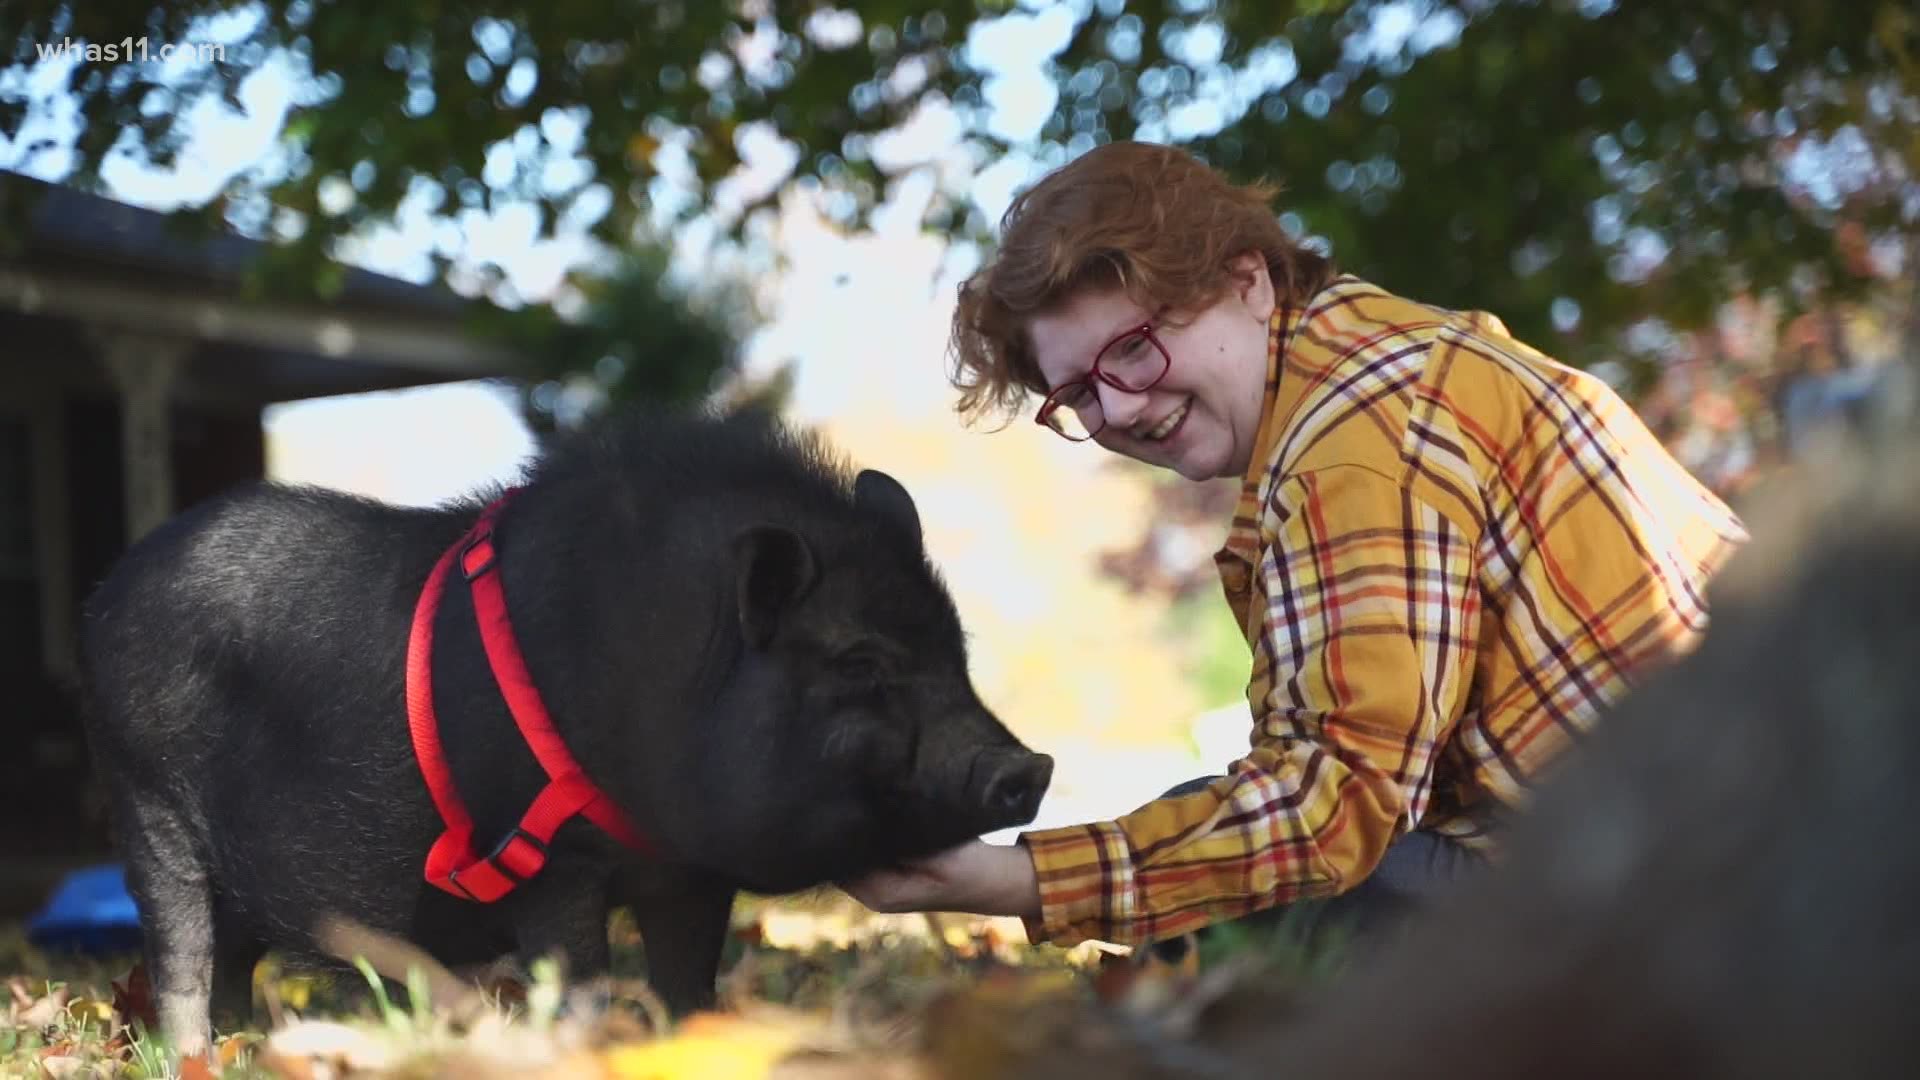 Walter is far from an ordinary pig. He has become a bit of a celebrity in Shelbyville, earning the nickname 'Mr. Hollywood.'